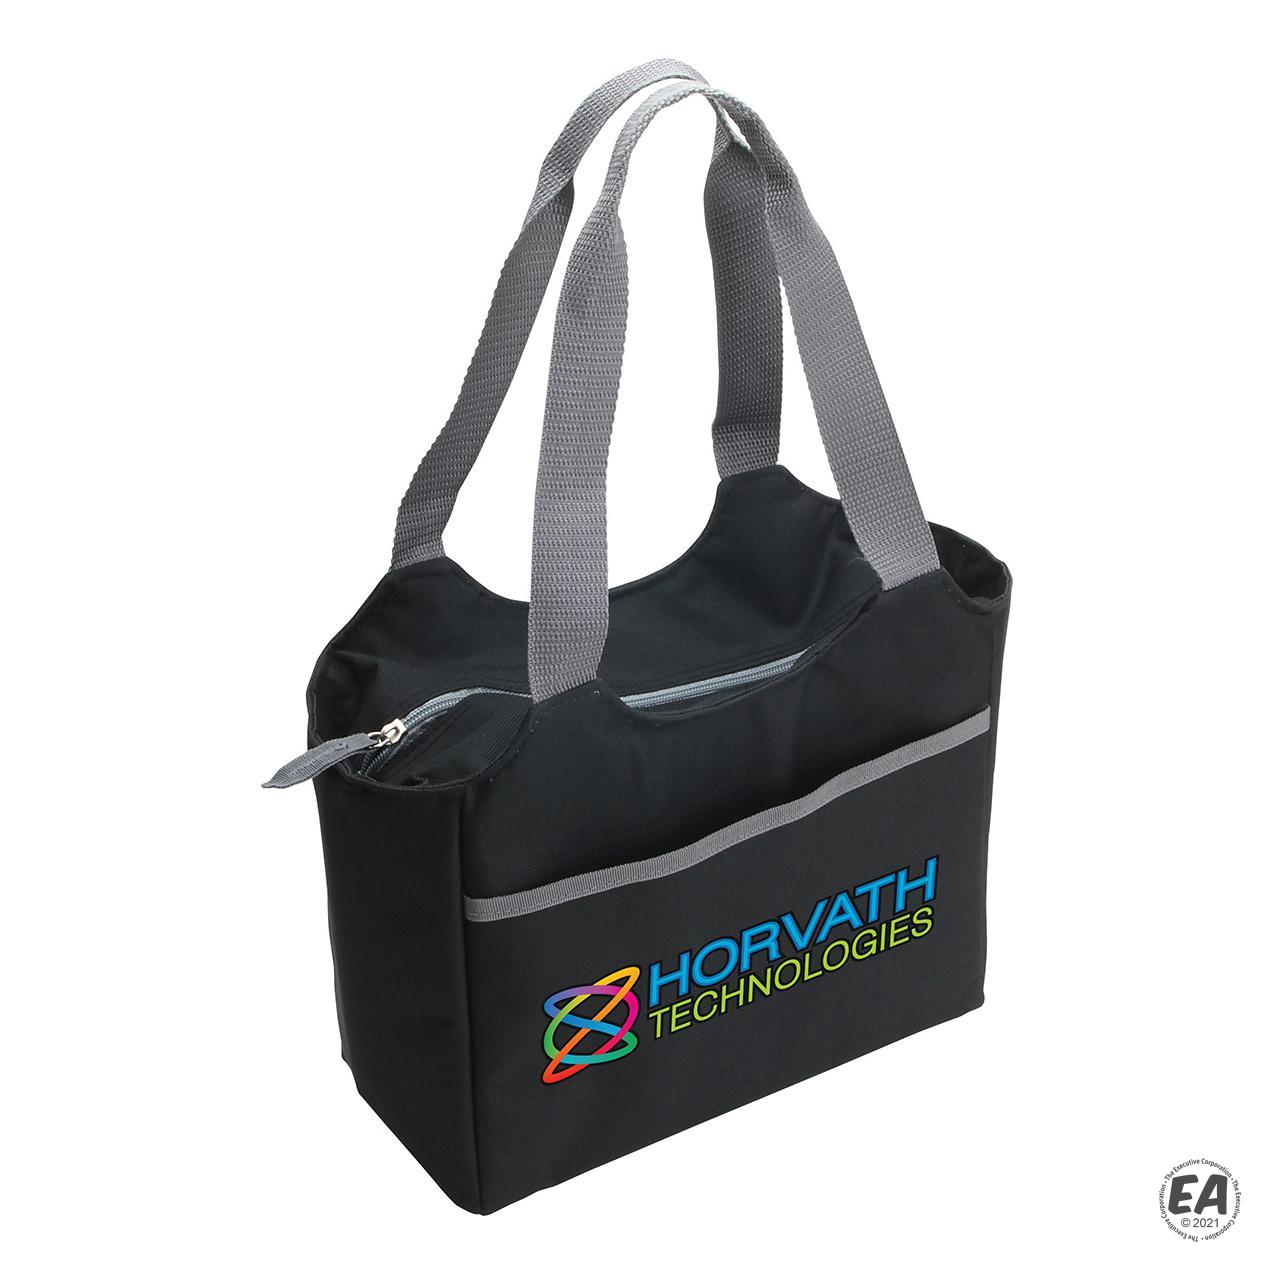 Portable OEM Eco-friendly Shopping Bag Insulated Food Cooler Bag Customized Durable Lunch Cooler Tote Bag